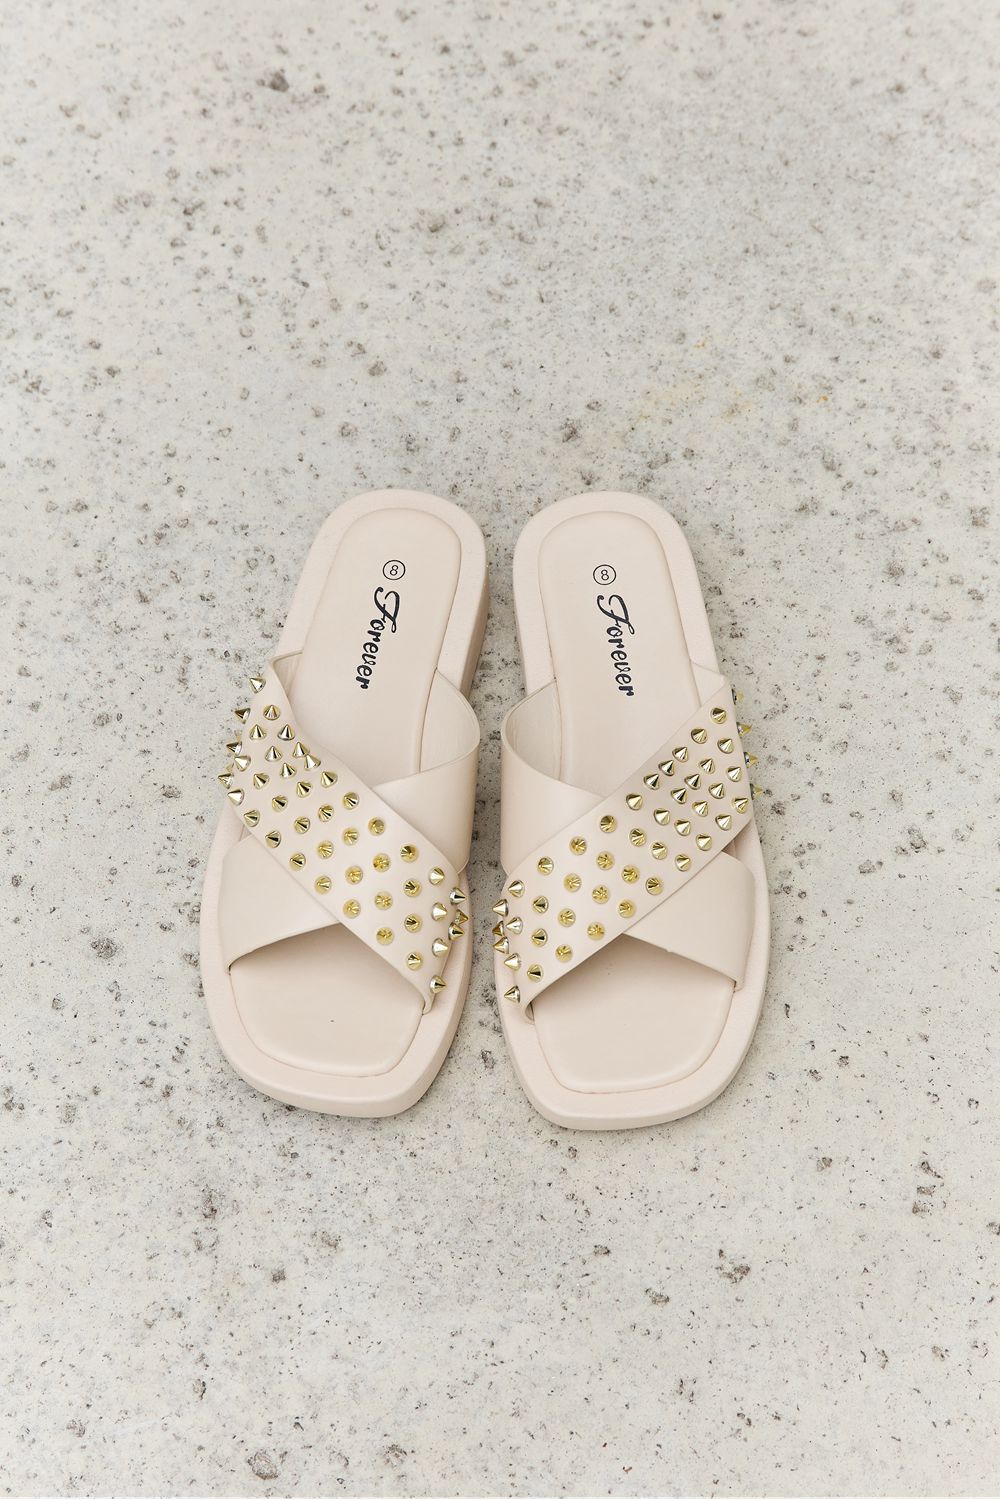 Studded Cross Strap Sandals in Cream